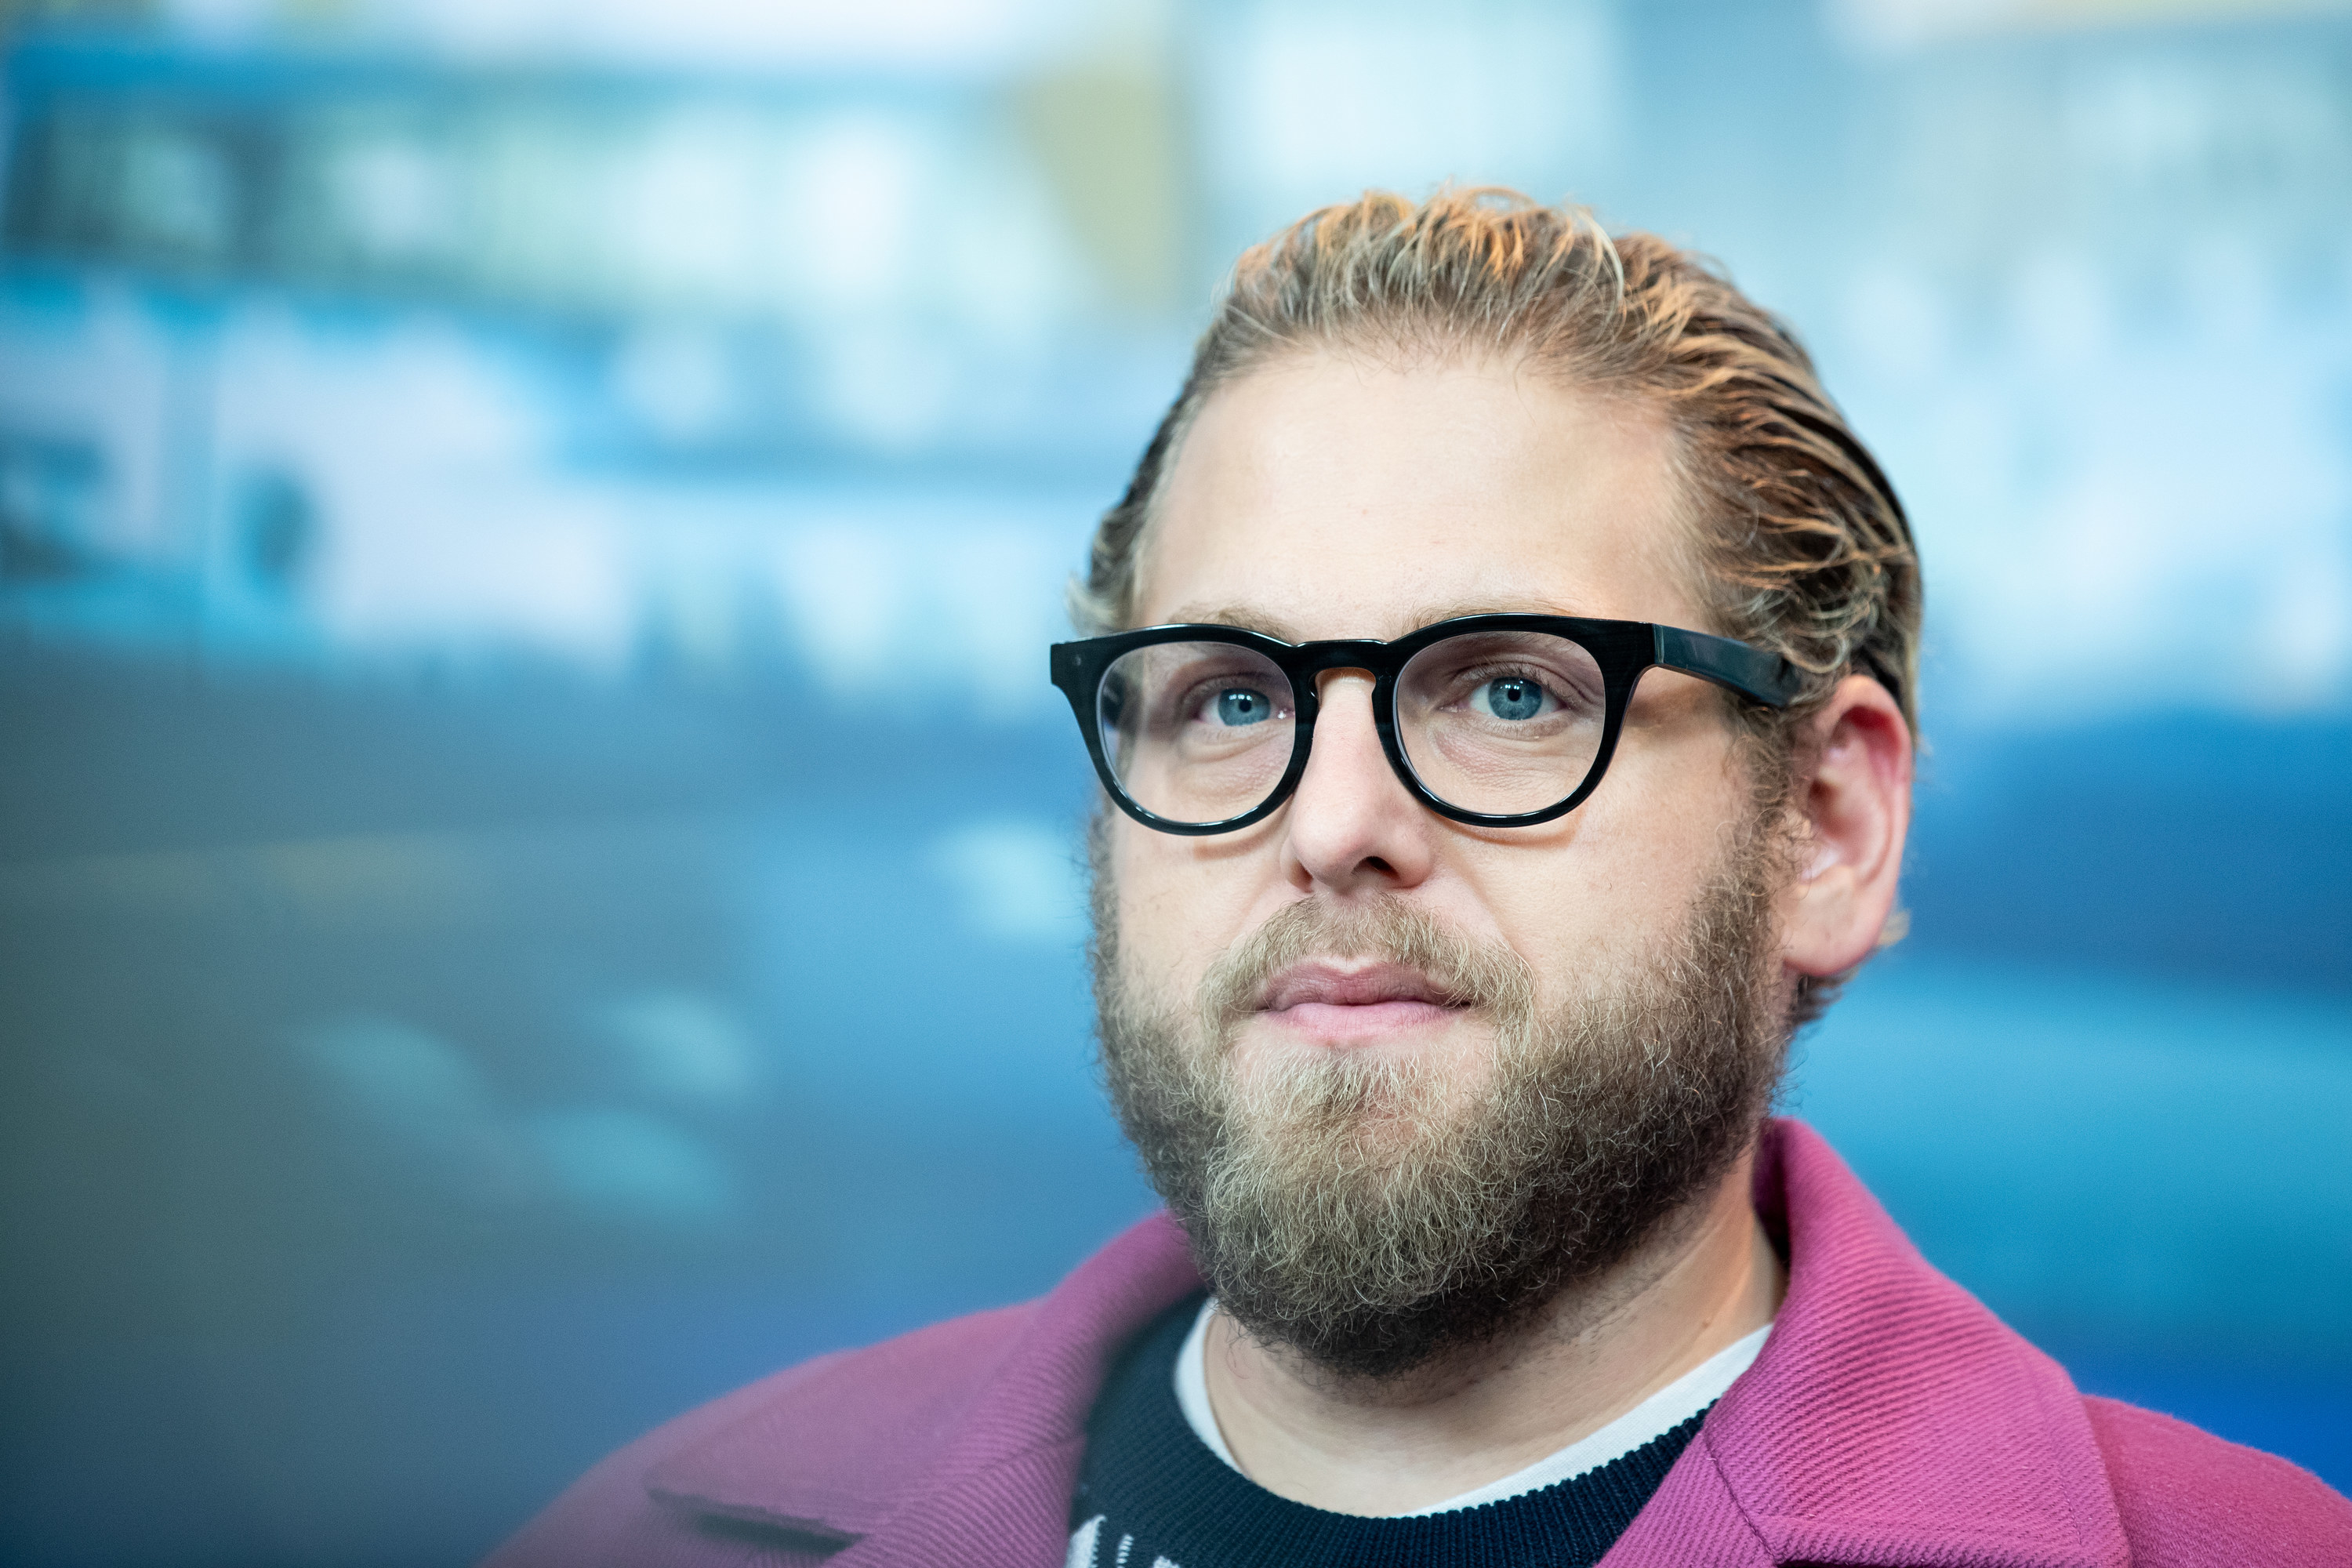 A head shot of Jonah with glasses and a beard